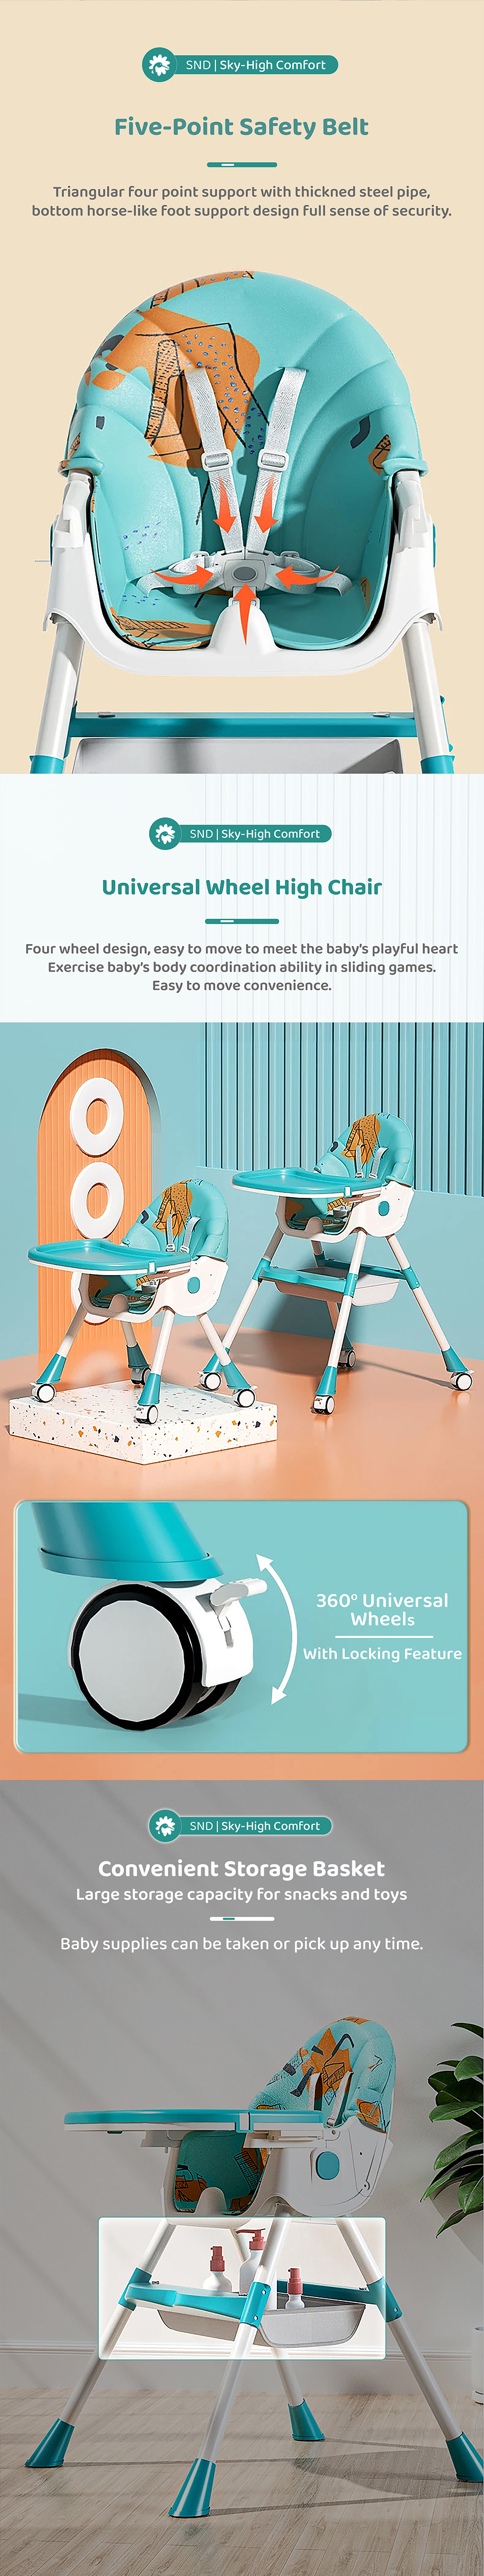 Table Talk High Chair with Five Point Safety Belt